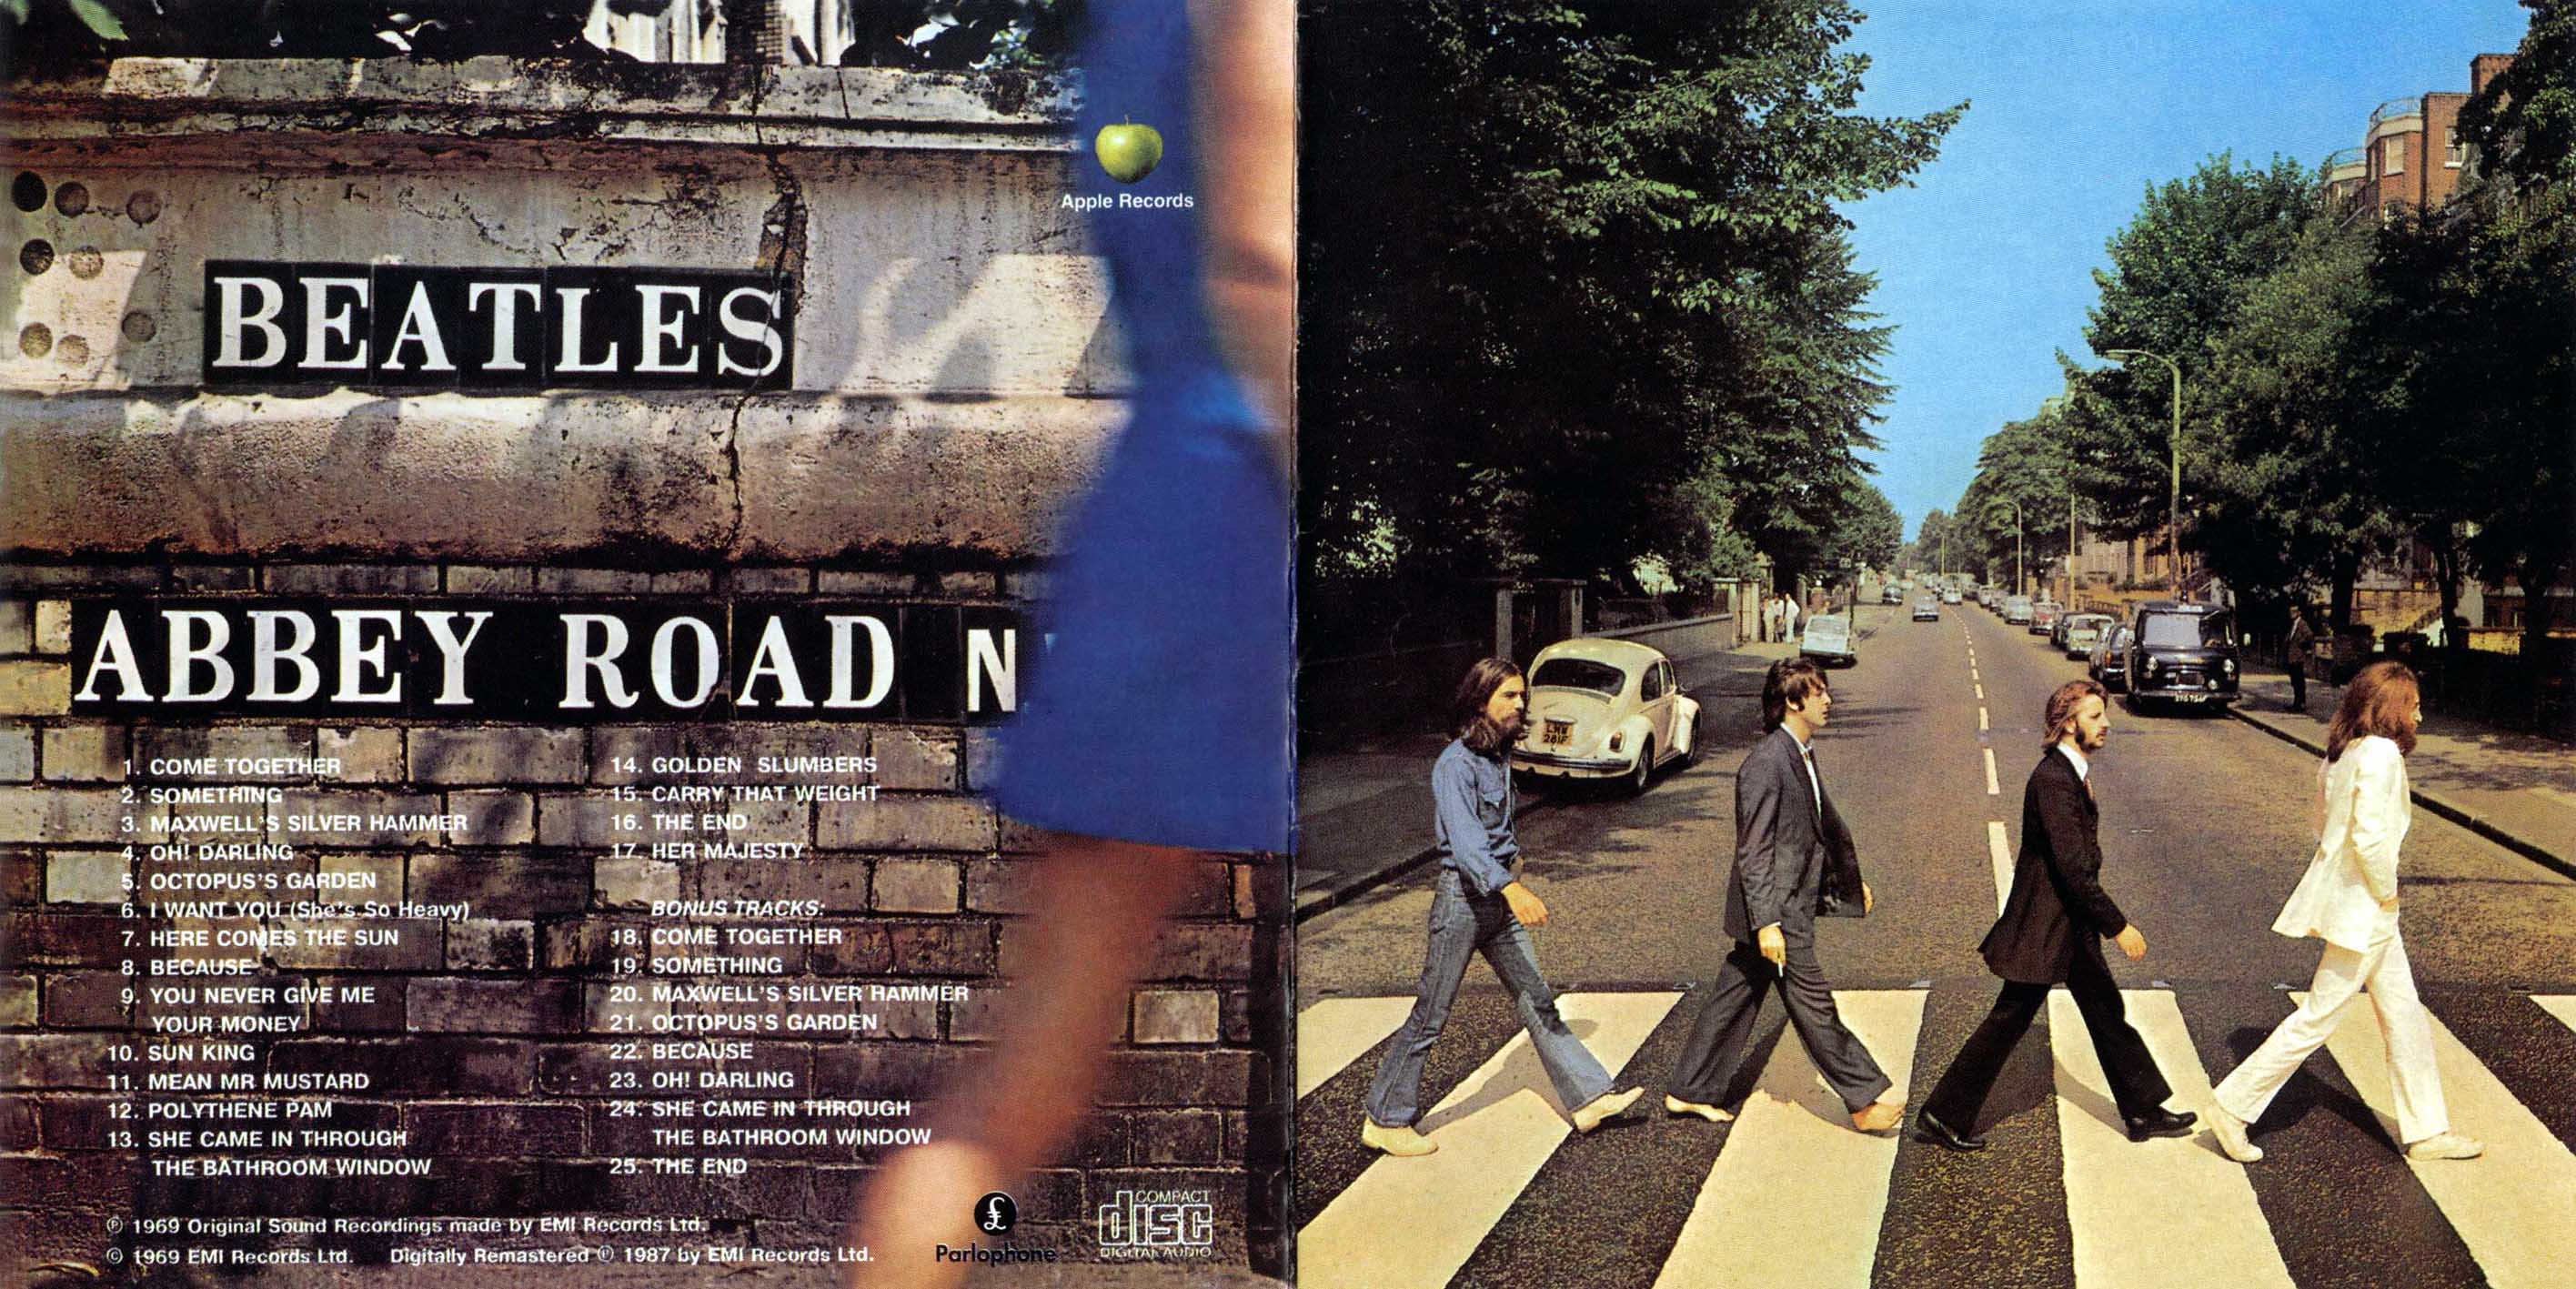 The crazy story behind this iconic Abbey Road photograph